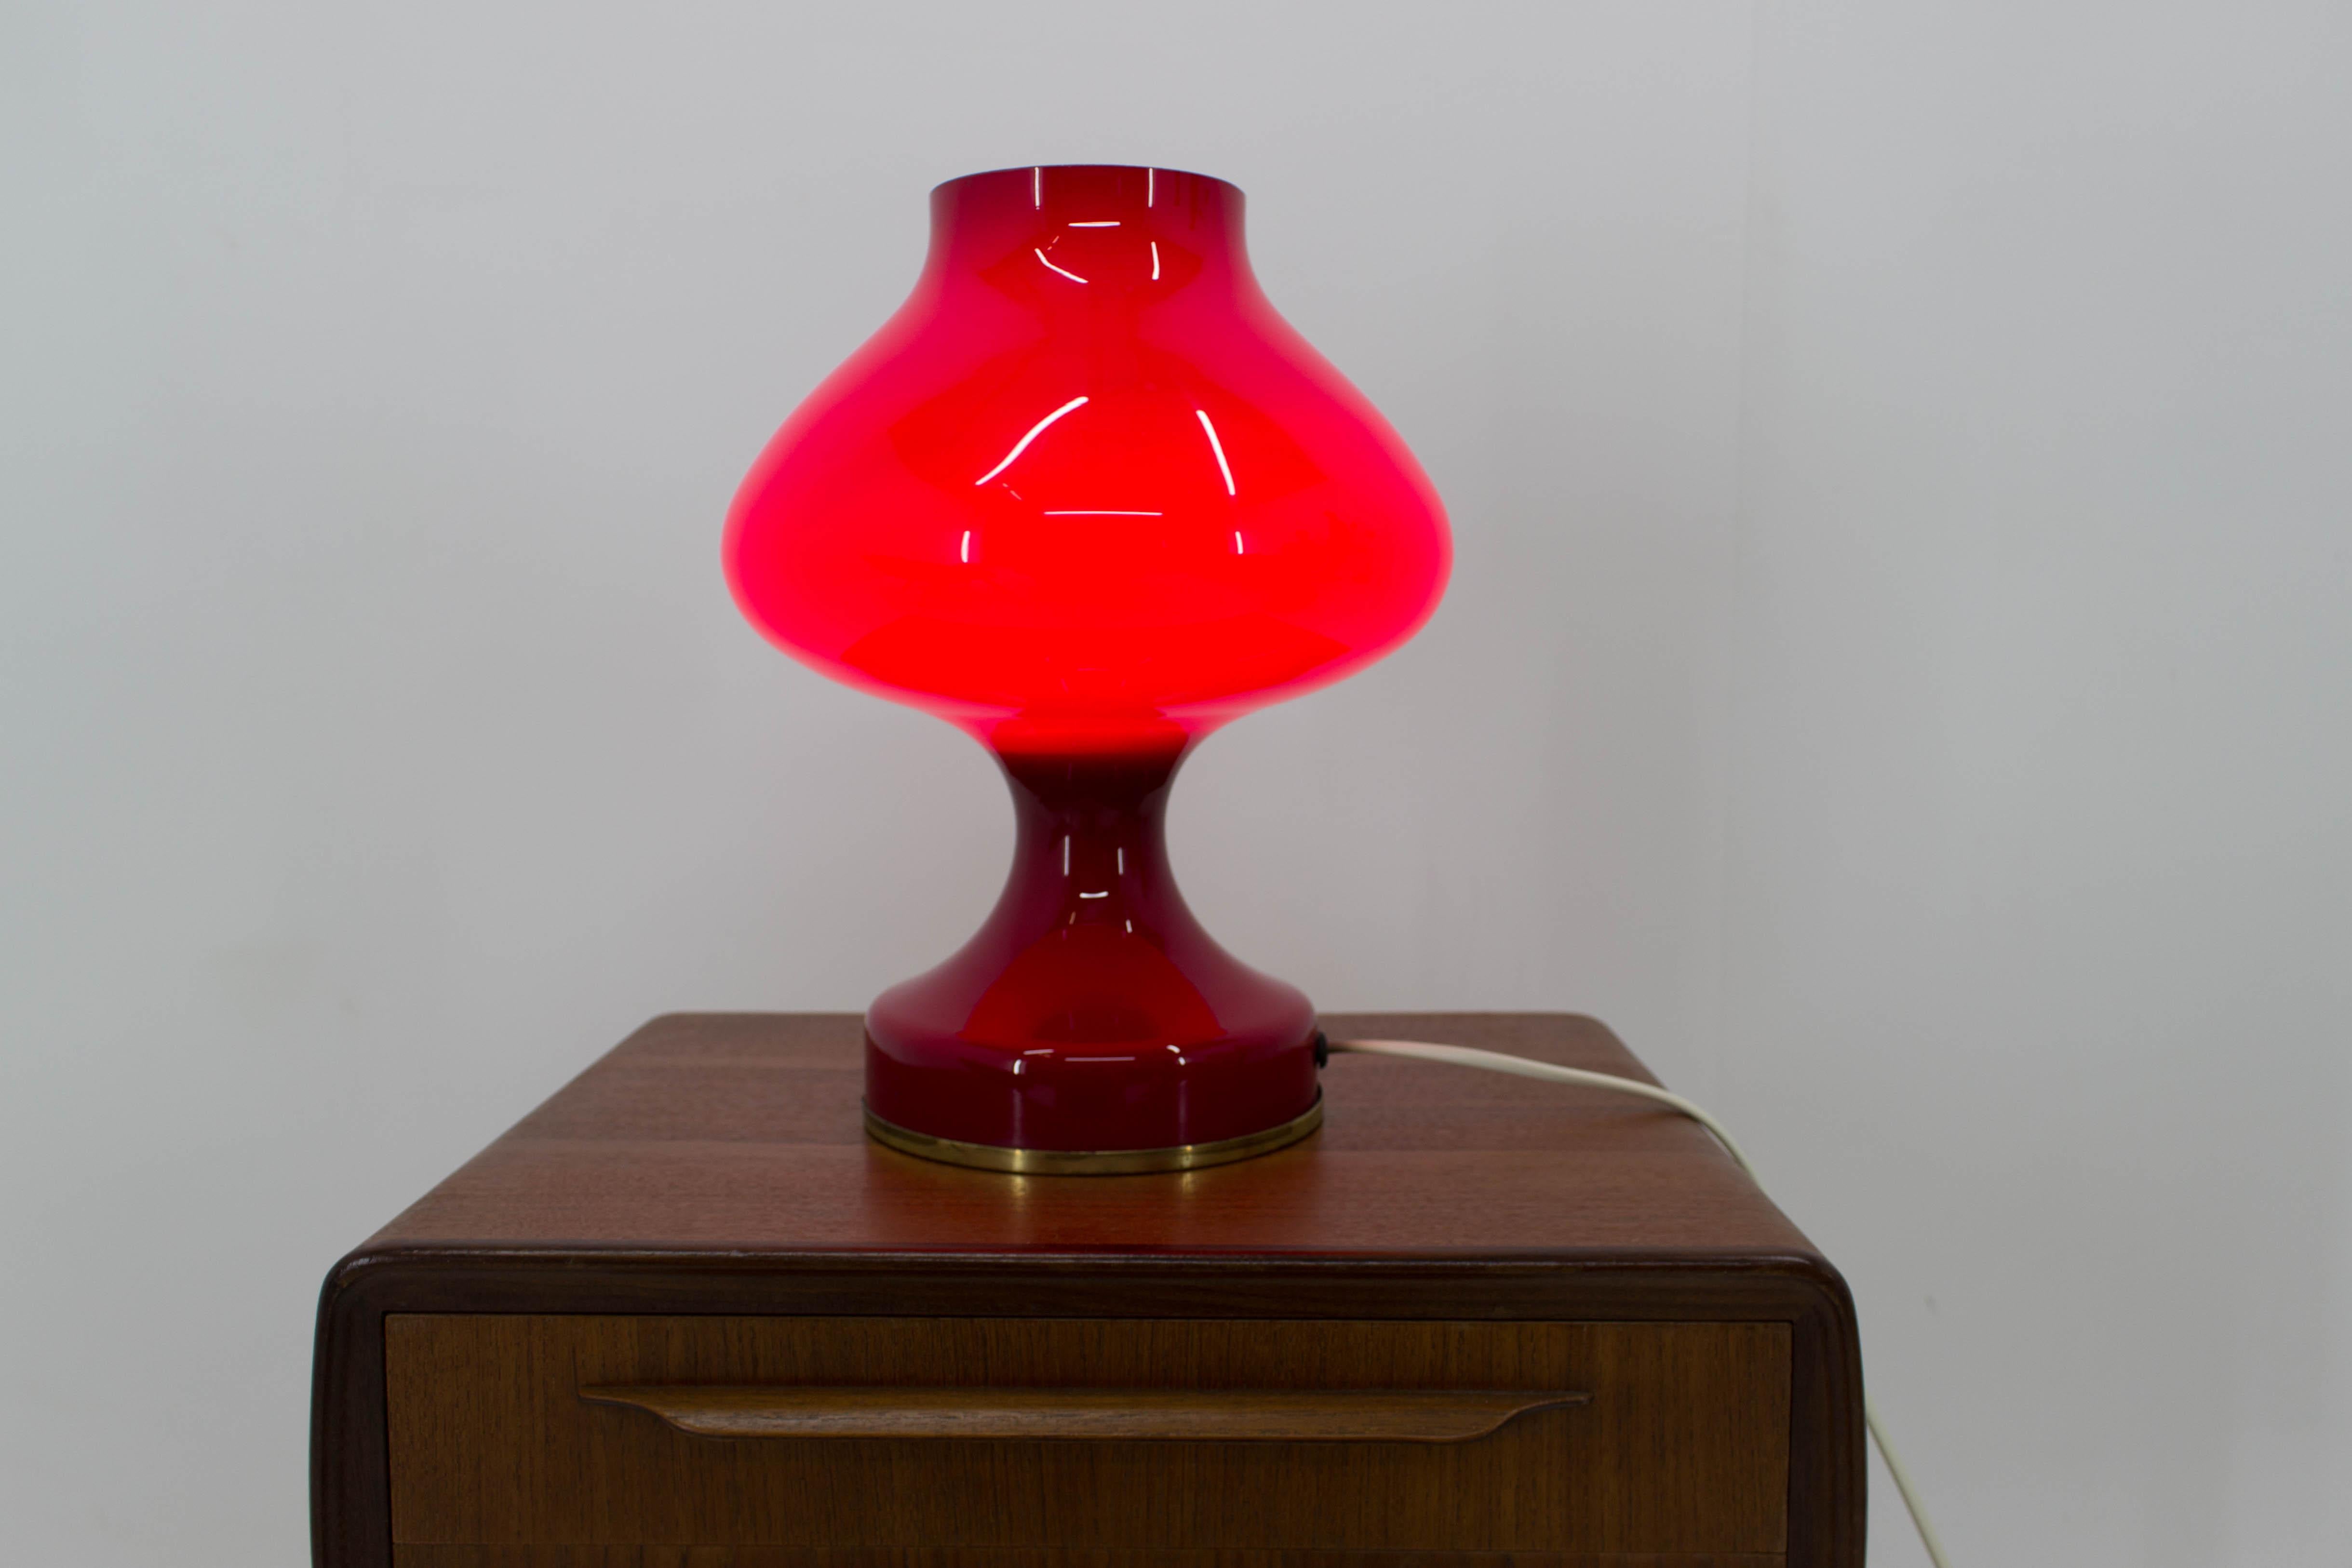 Glass table lamp designed by Stepan Tabera for Czechoslovakian company OPP Jihlava in early 1970s. Two layers of glass - white inside and red outside. 220V, E27. Very good condition, no defects on glass.